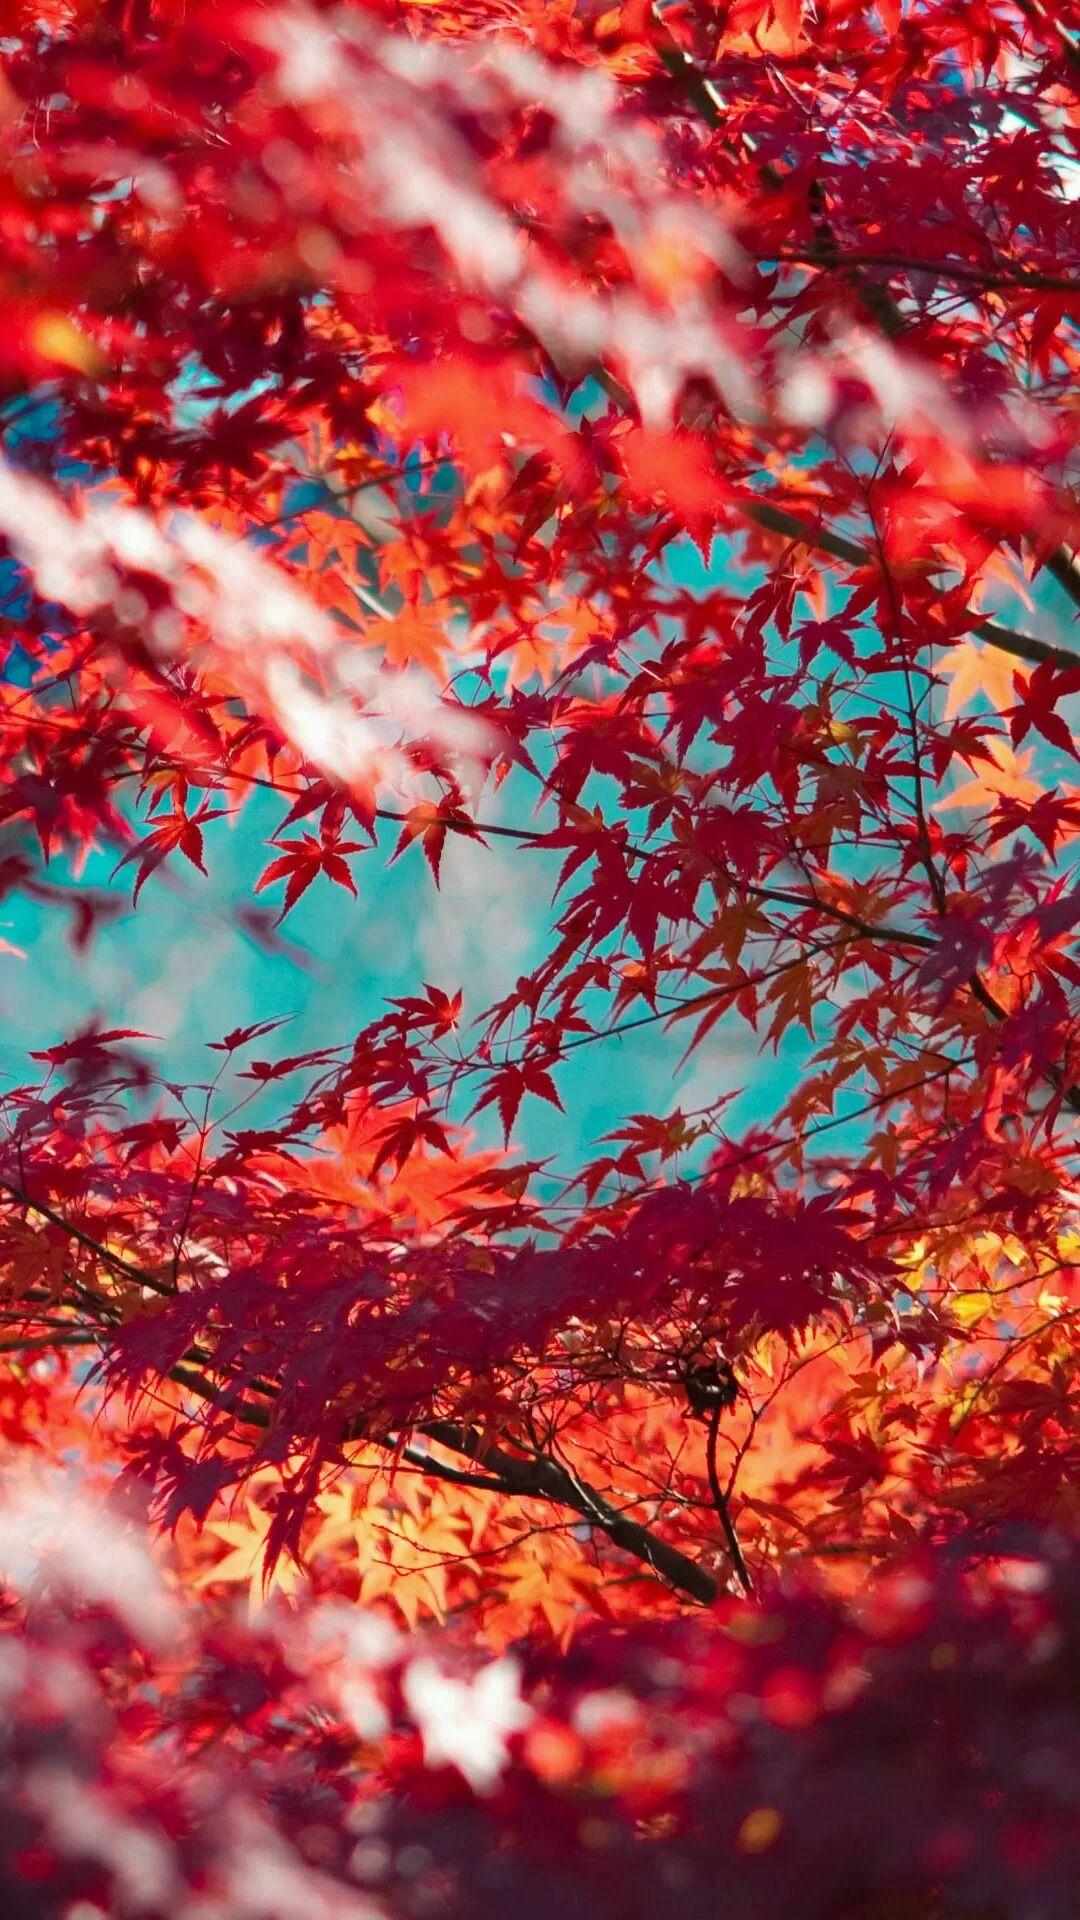 Red Maple Leaves. Tree wallpaper background, Cute fall wallpaper, iPhone wallpaper fall